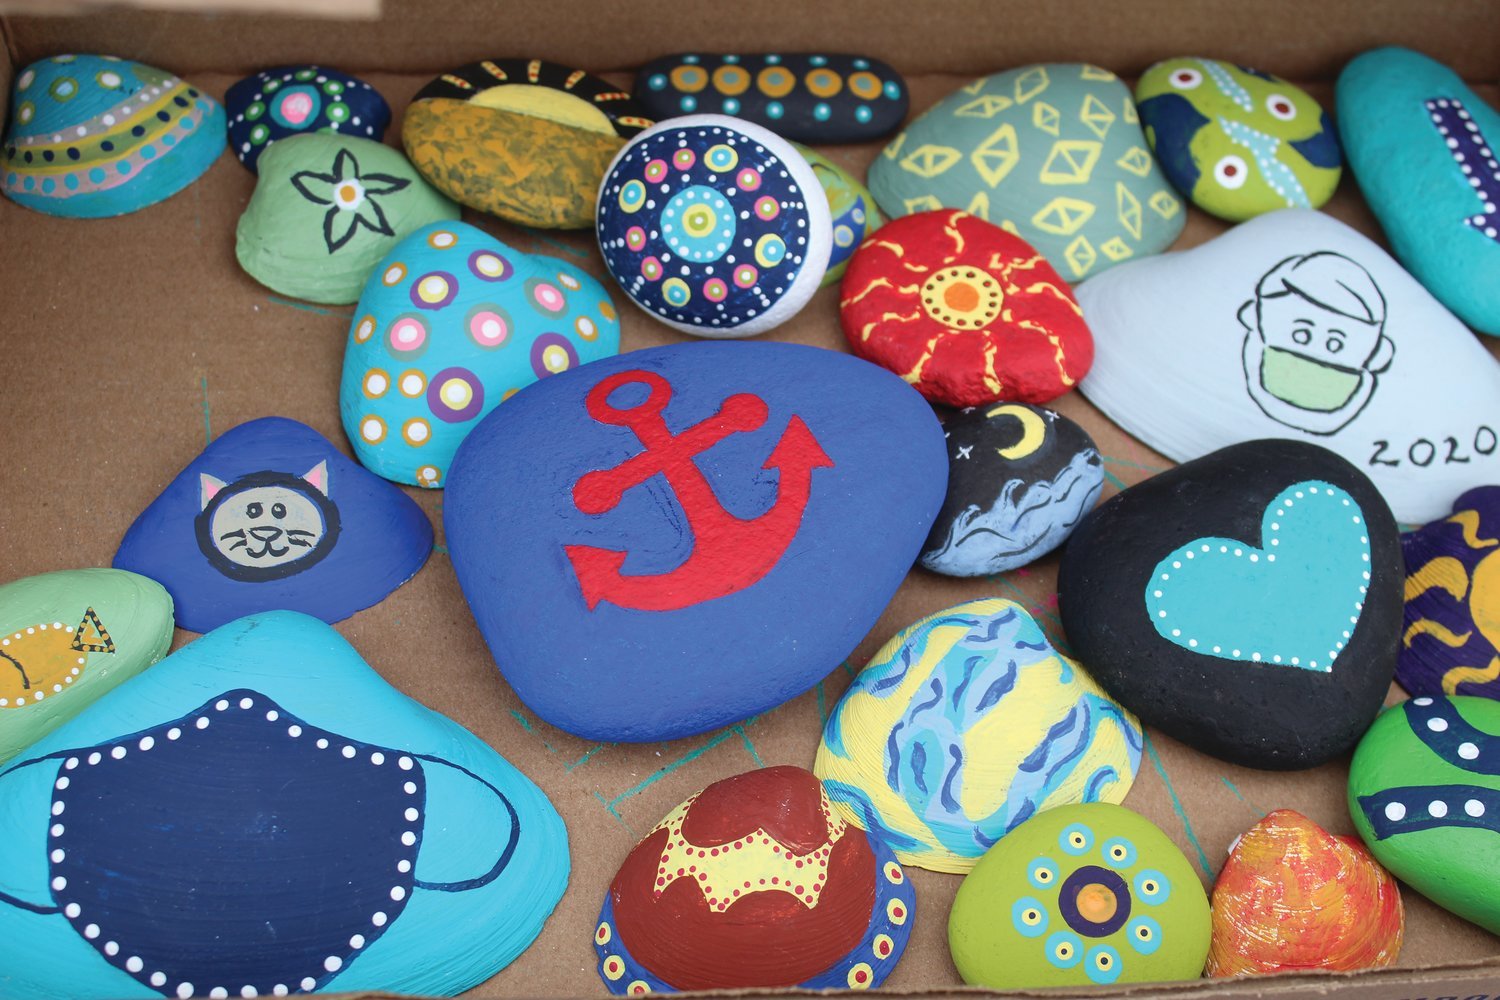 Alongside traditional Rhode Island motifs like anchors, waves and sea life, the shells painted by the Raucci family also feature a few distinctly 2020 references — namely the familiar face masks that have become commonplace in the wake of the pandemic. Scarlett sold these (and many other designs) at the socially distanced shell-stand which she set up earlier this year at Jerry Brown Farm.